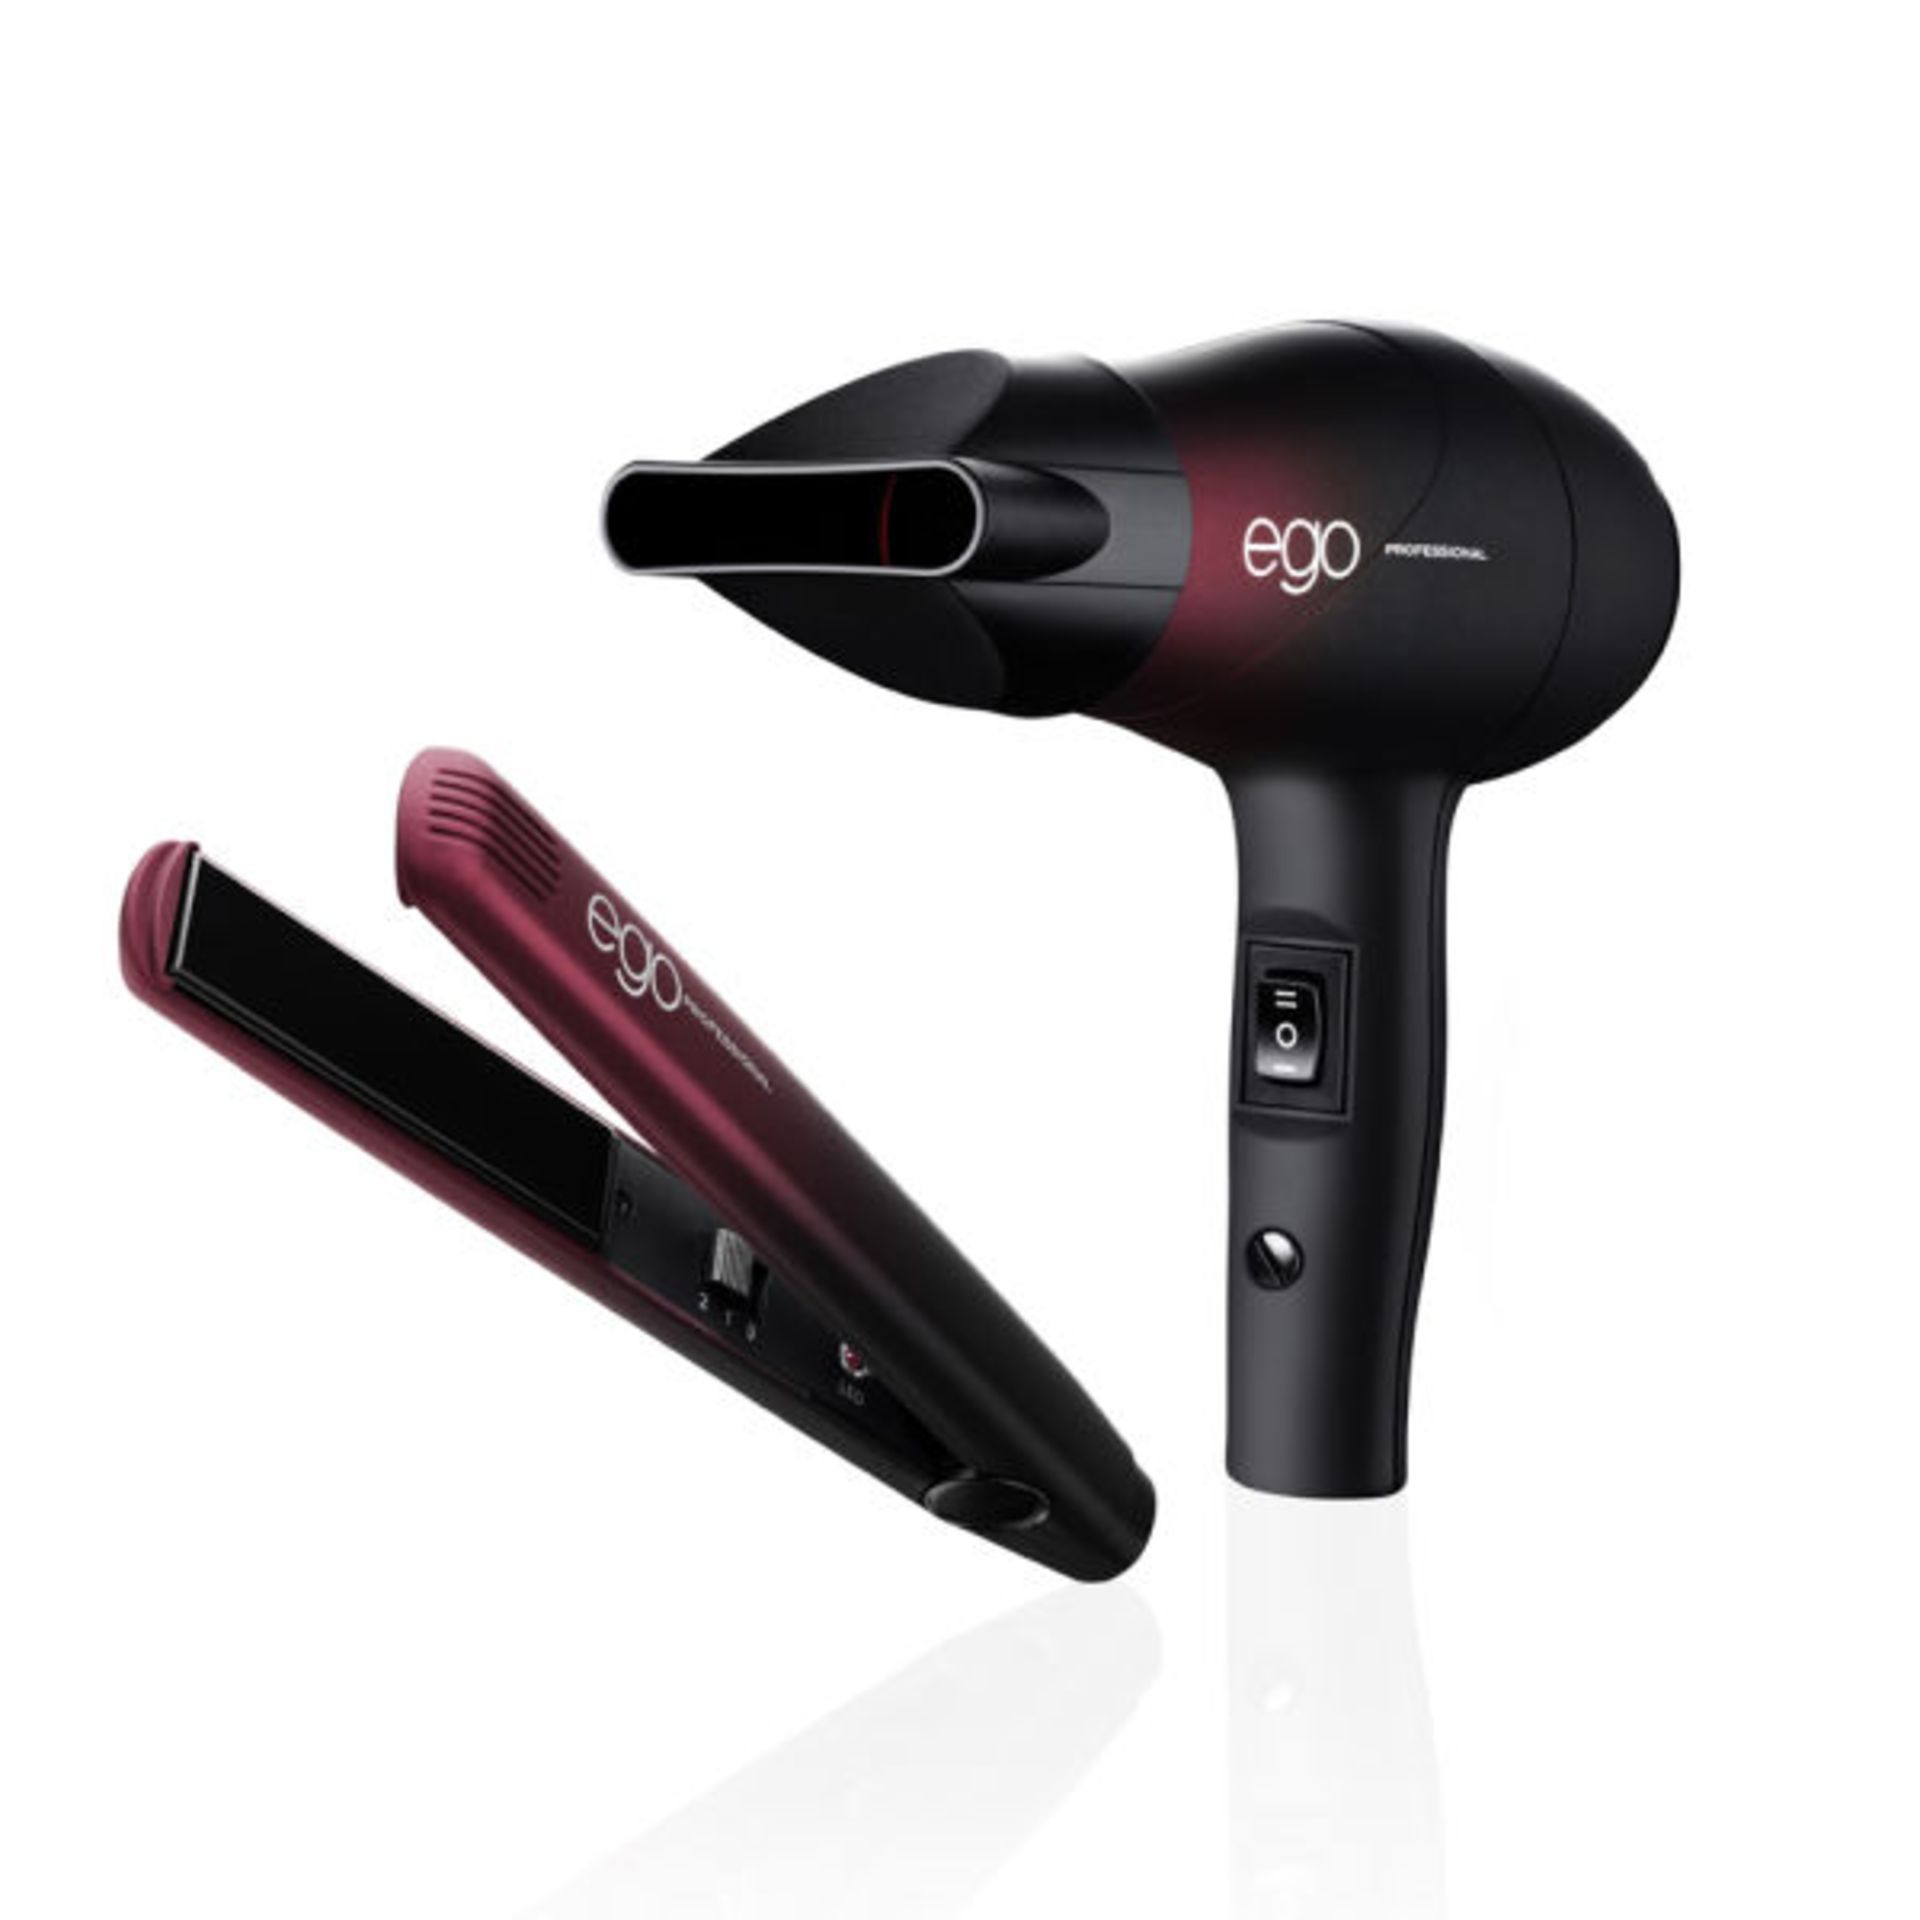 5 x Ego Professional Full On And Fabulous Ego Set (Alter Ego Hairdryer And Little Iron) [Grade A] - Image 3 of 3